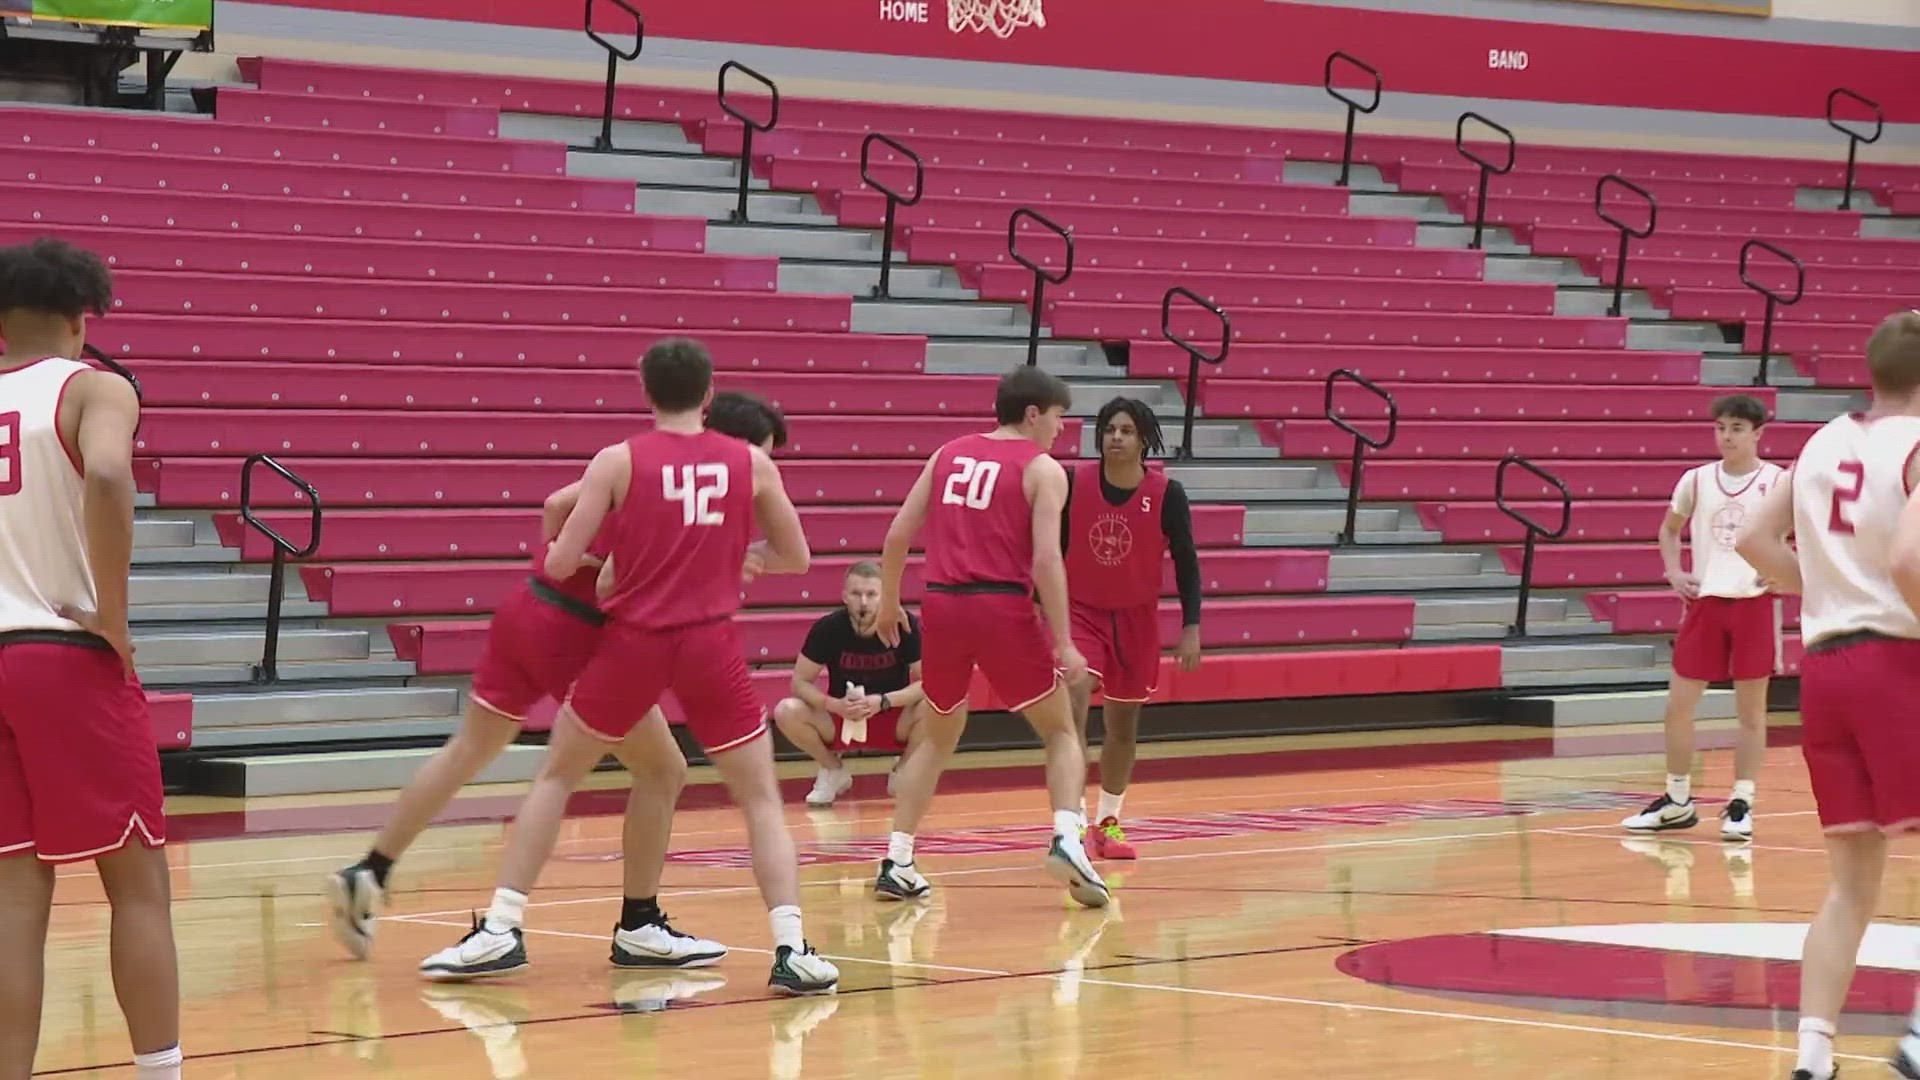 13Sports reporter Dominic Miranda breaks down how Fishers is preparing to take on Ben Davis in the IHSAA Class 4A basketball state finals.